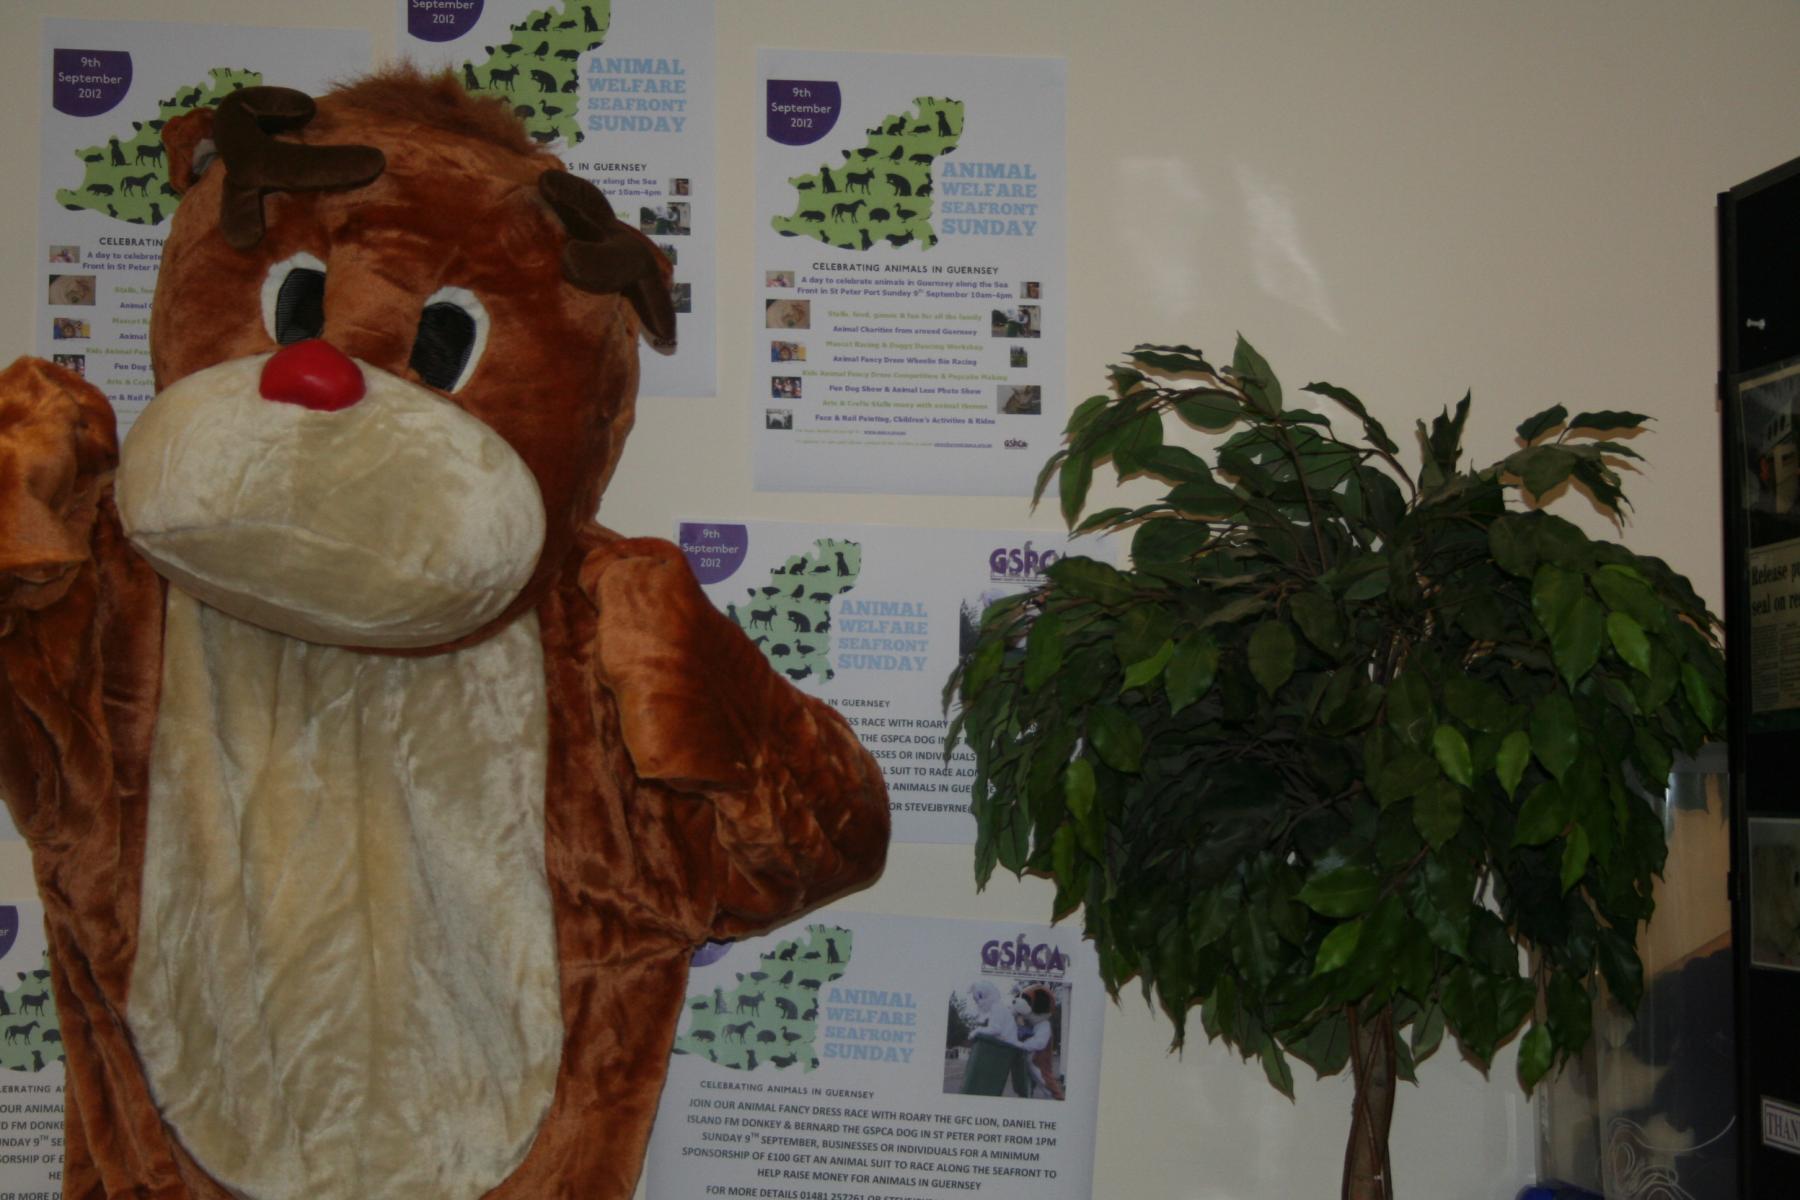 Rudolph the Reindeer is looking for a Business or Person to sponsor and take part